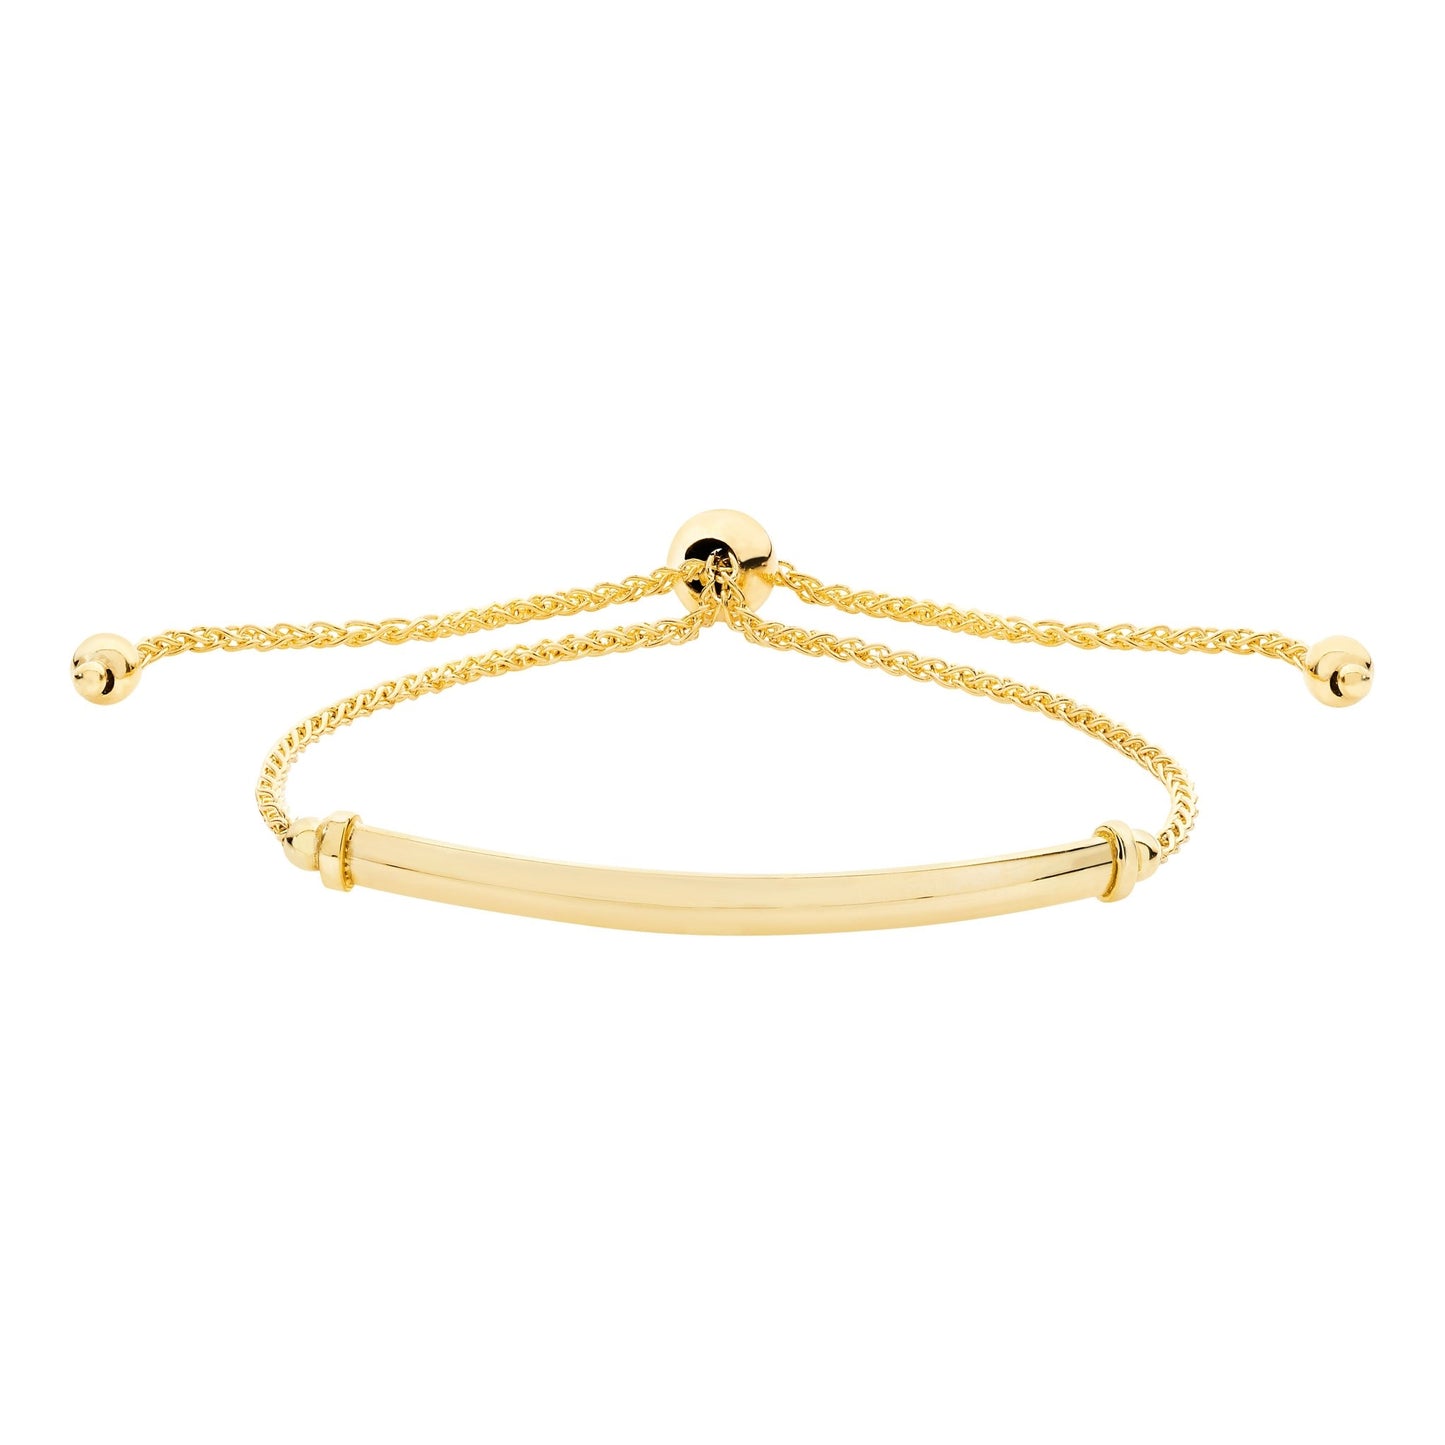 9 Carat Yellow Gold ID Pull Style Bracelet - 8 Inches - FJewellery